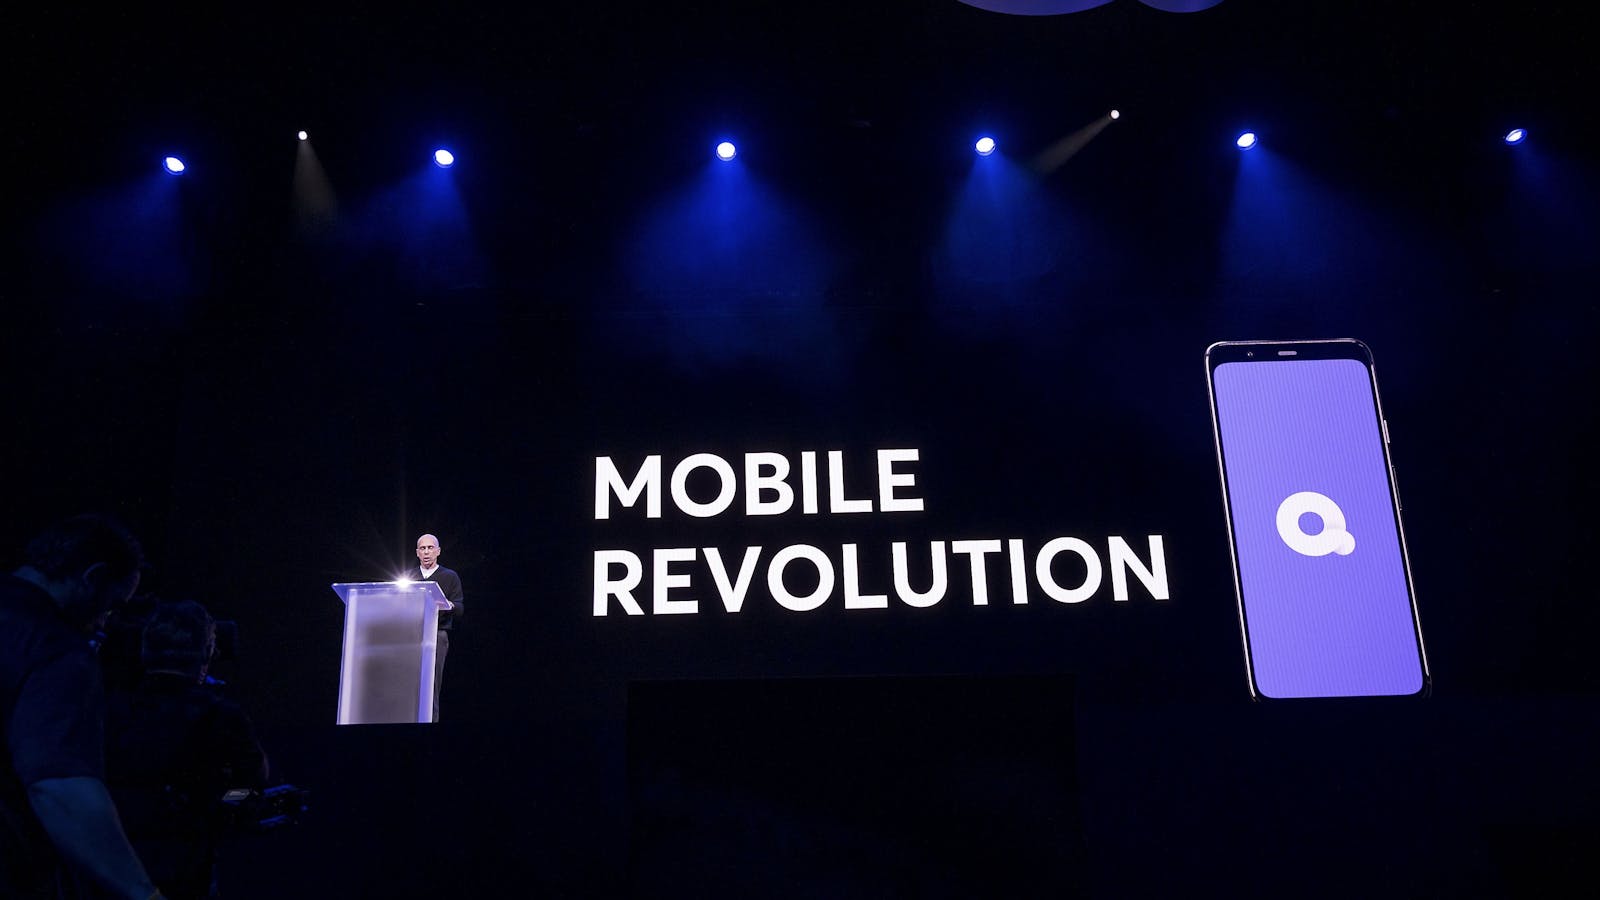 Jeffrey Katzenberg unveiling Quibi at CES earlier this year. Photo by Bloomberg